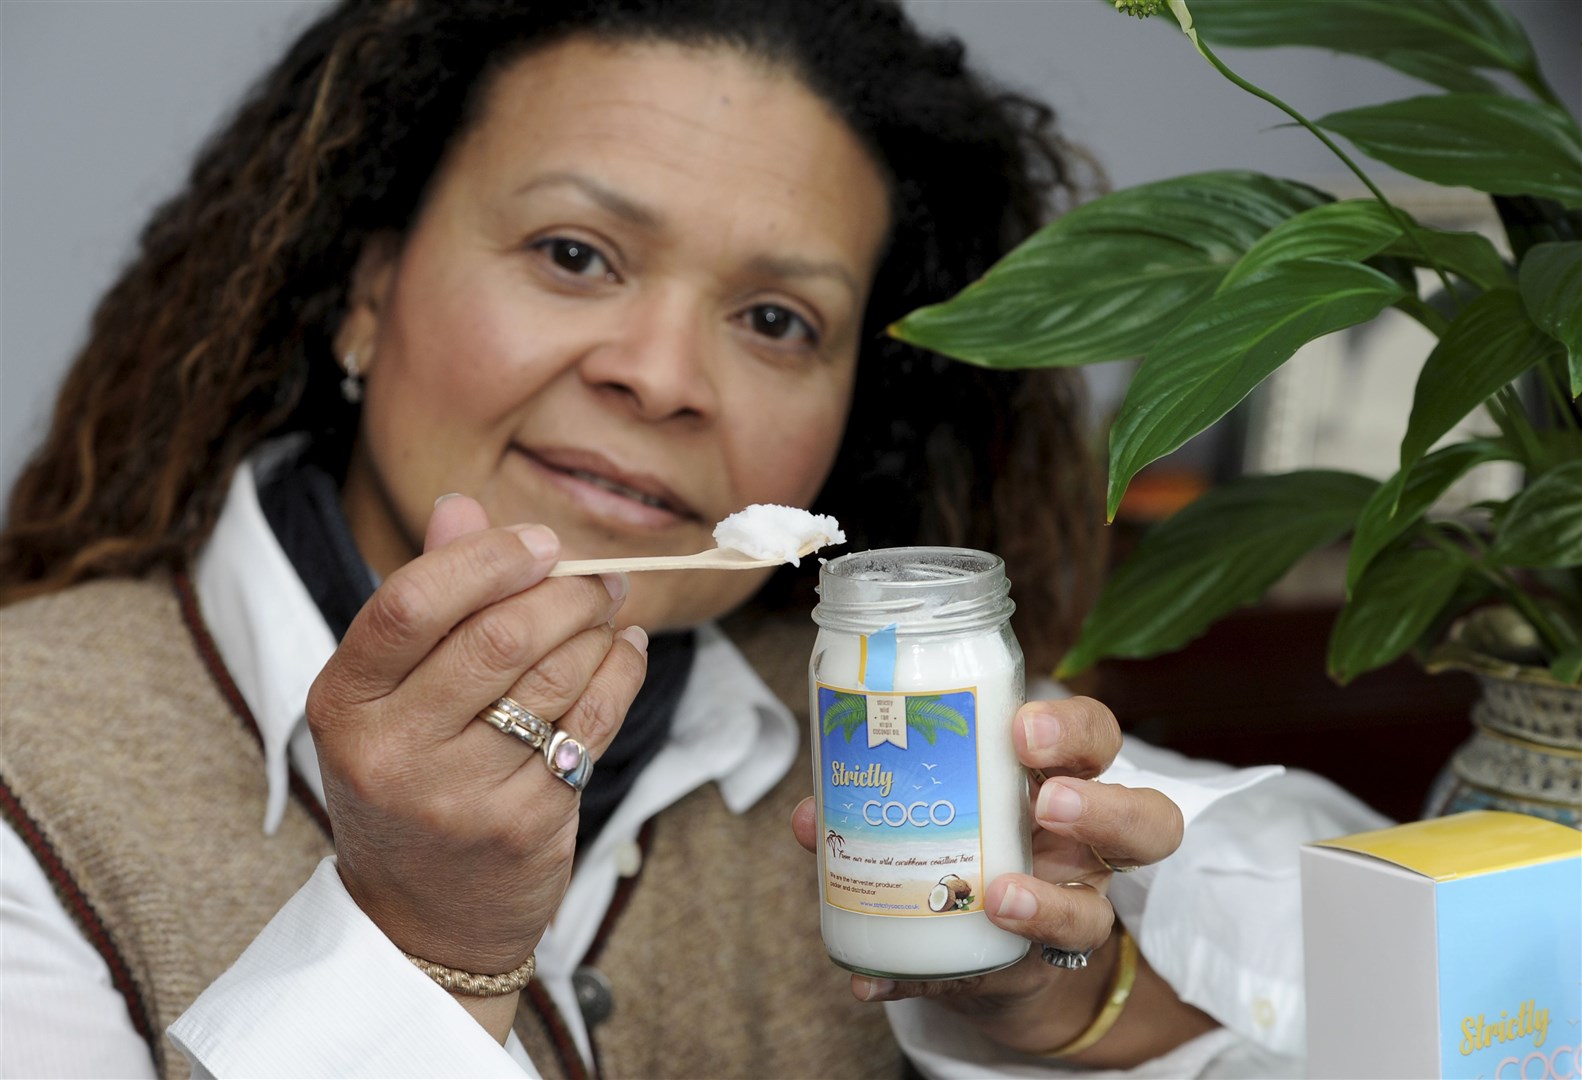 Ginger Kinnaird has been awarded two stars in the Great Taste Awards 2019 round for her Strictly COCO coconut oil. Picture: Eric Cormack. Image No. 044602.